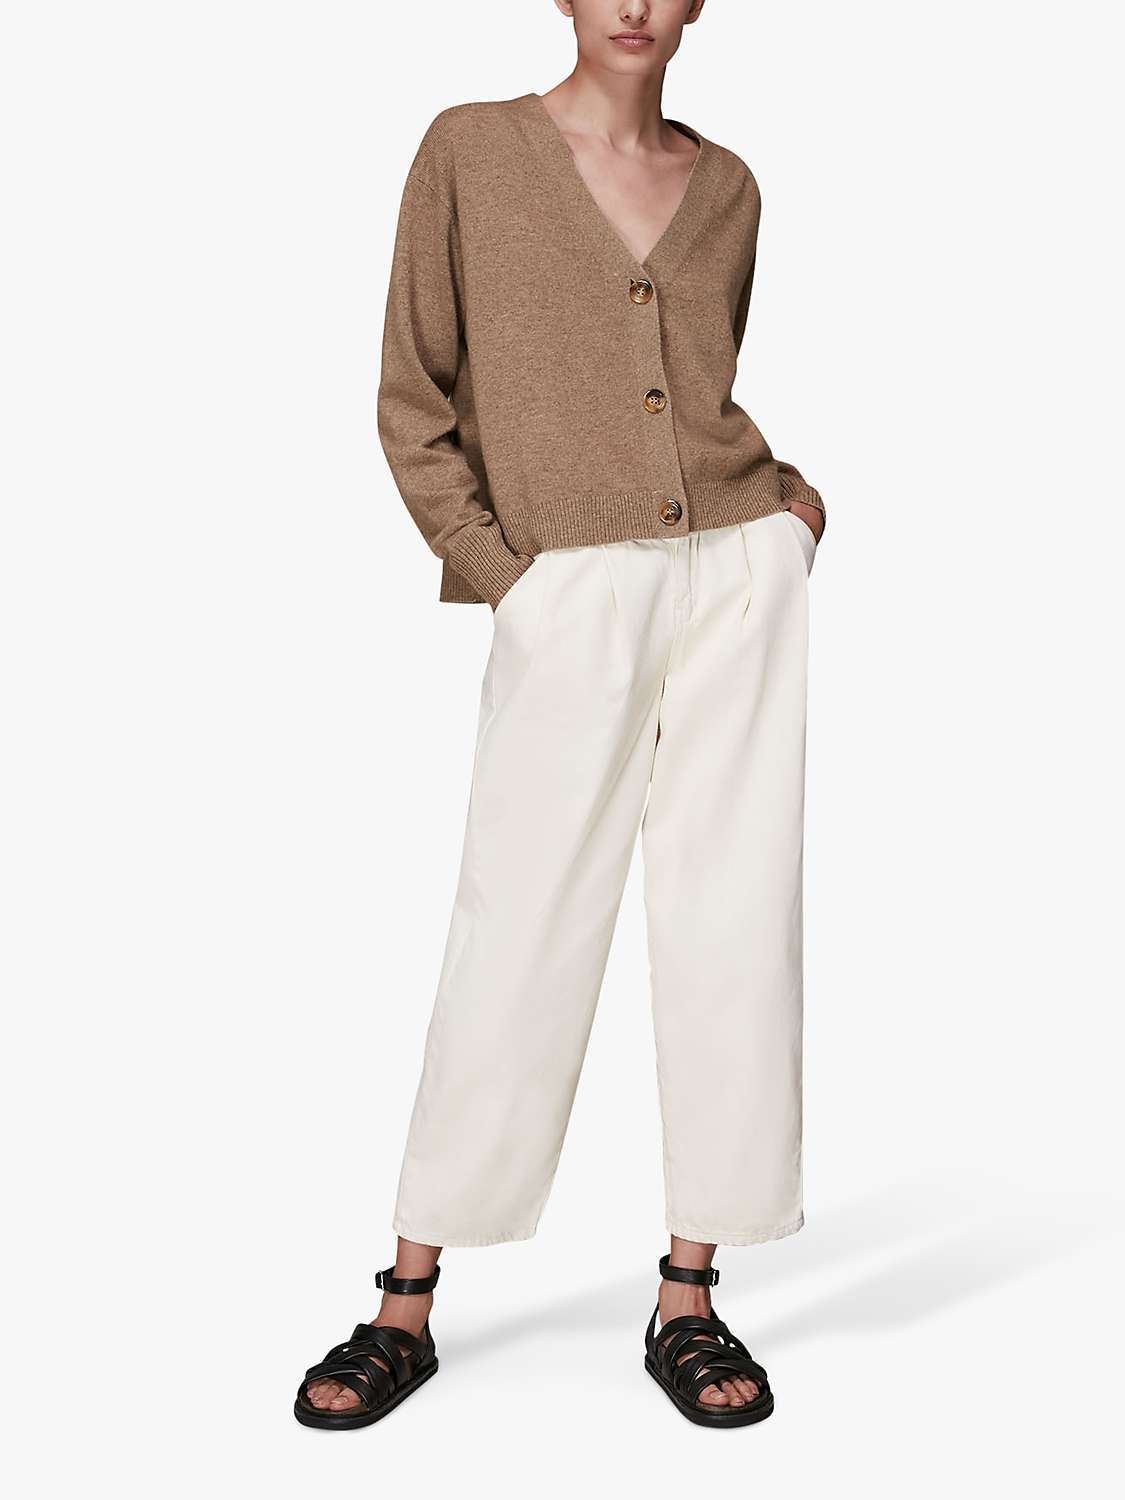 Buy Whistles Cashmere Cardigan Online at johnlewis.com